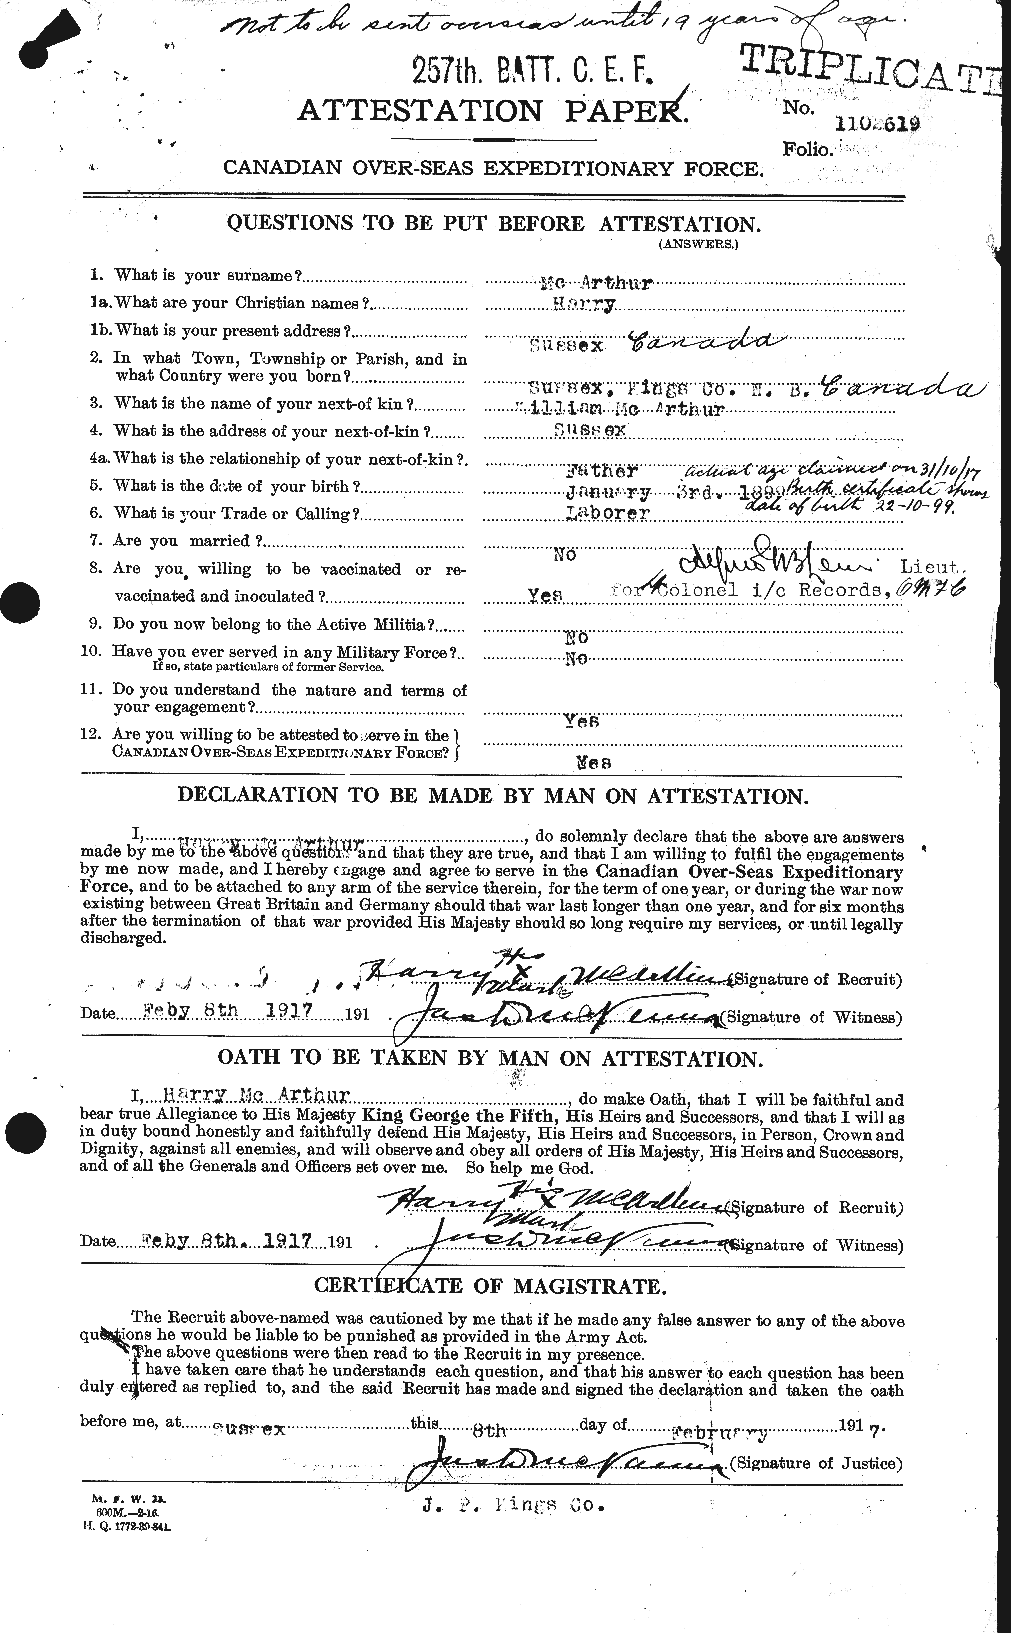 Personnel Records of the First World War - CEF 131028a